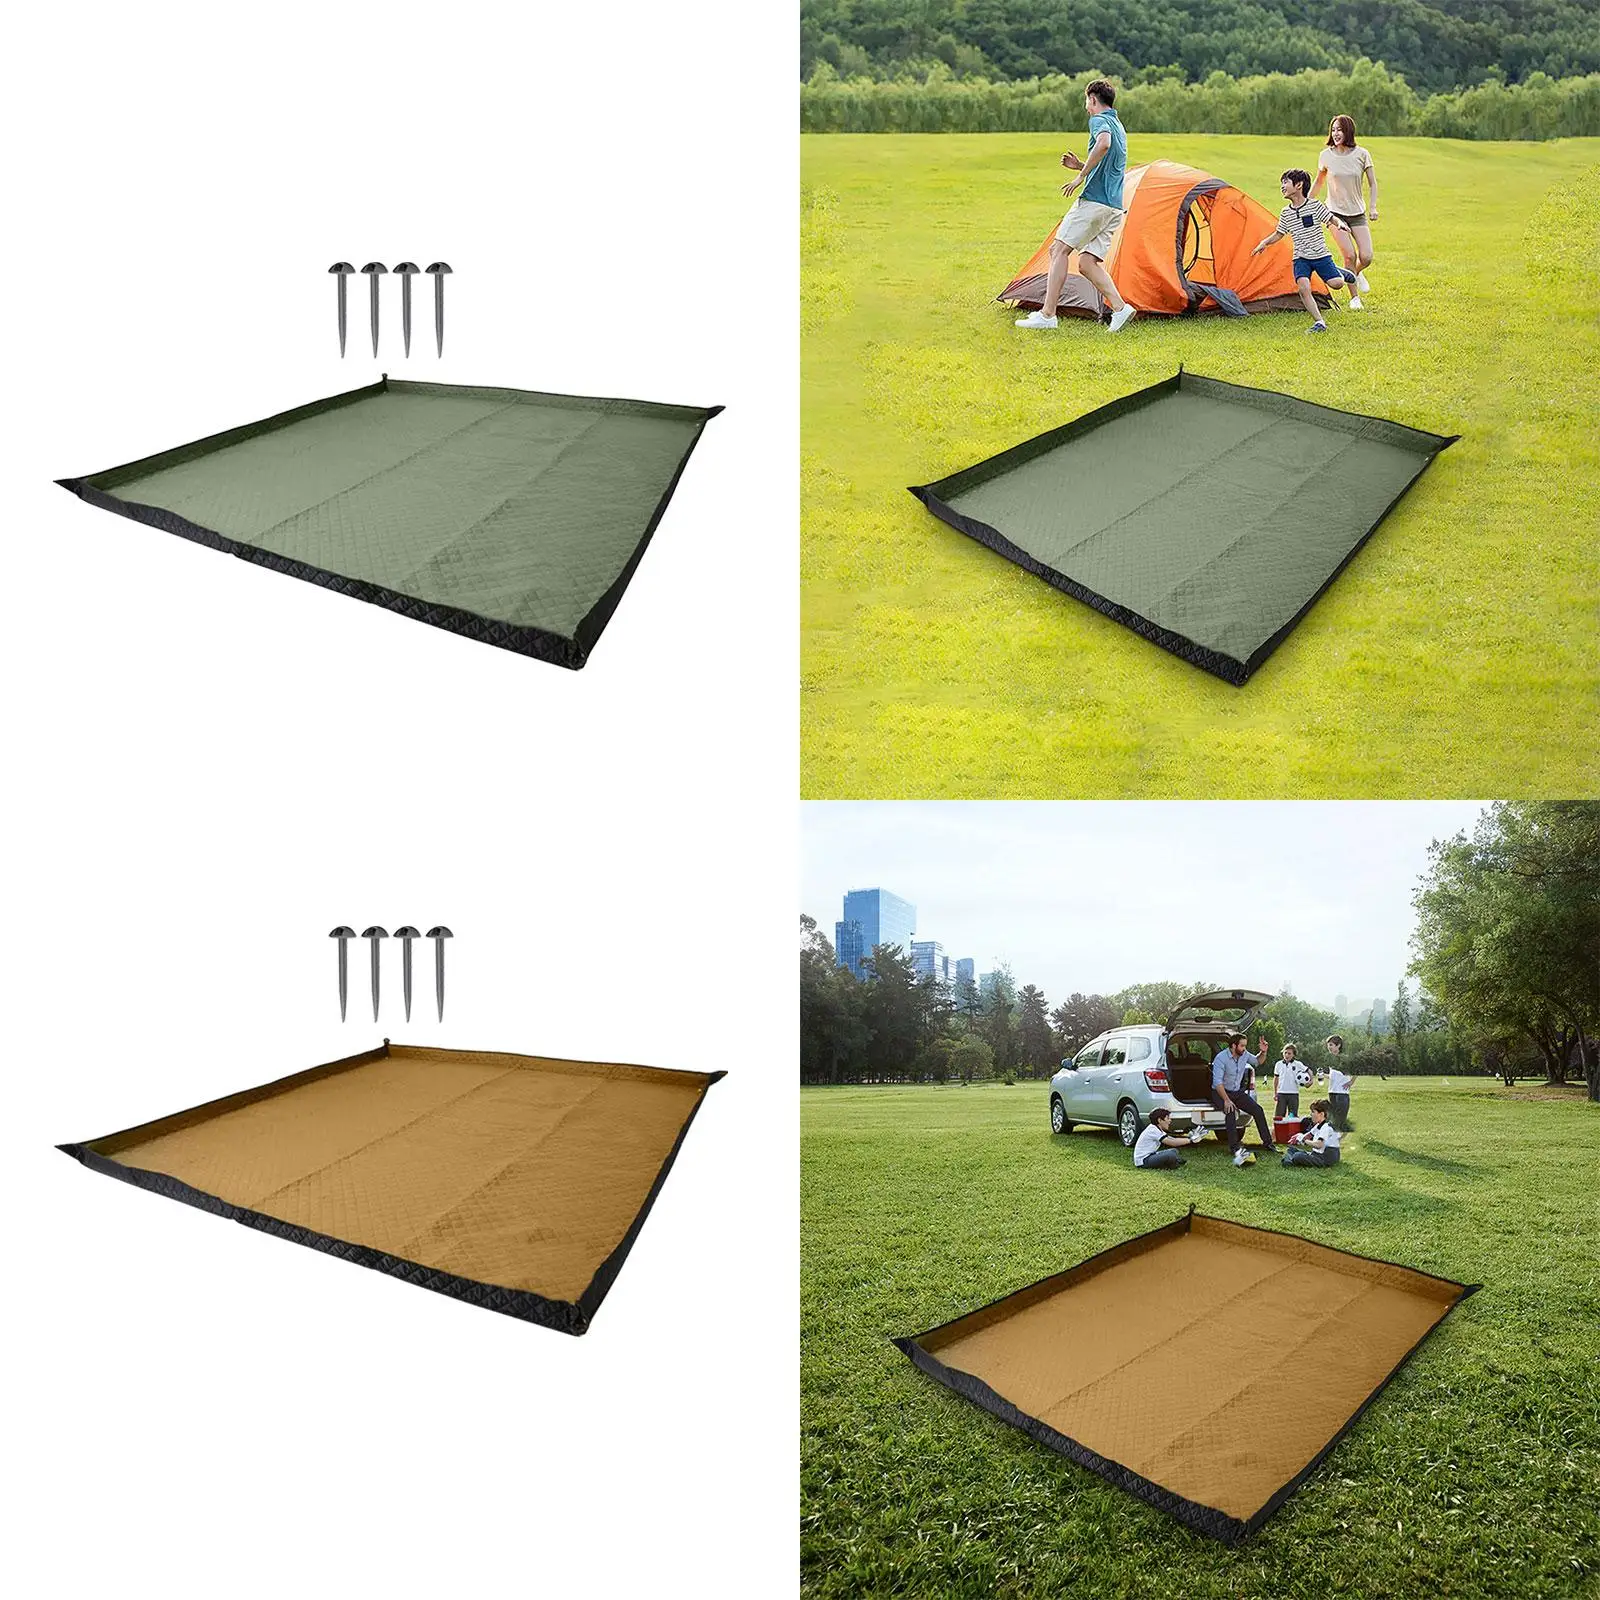 Sleeping Pad Park Blanket Folding 78.7inchx78.7inch Wear Resistant Rug Beach Mat Tent Pad for Camping Party Family Travel Hiking